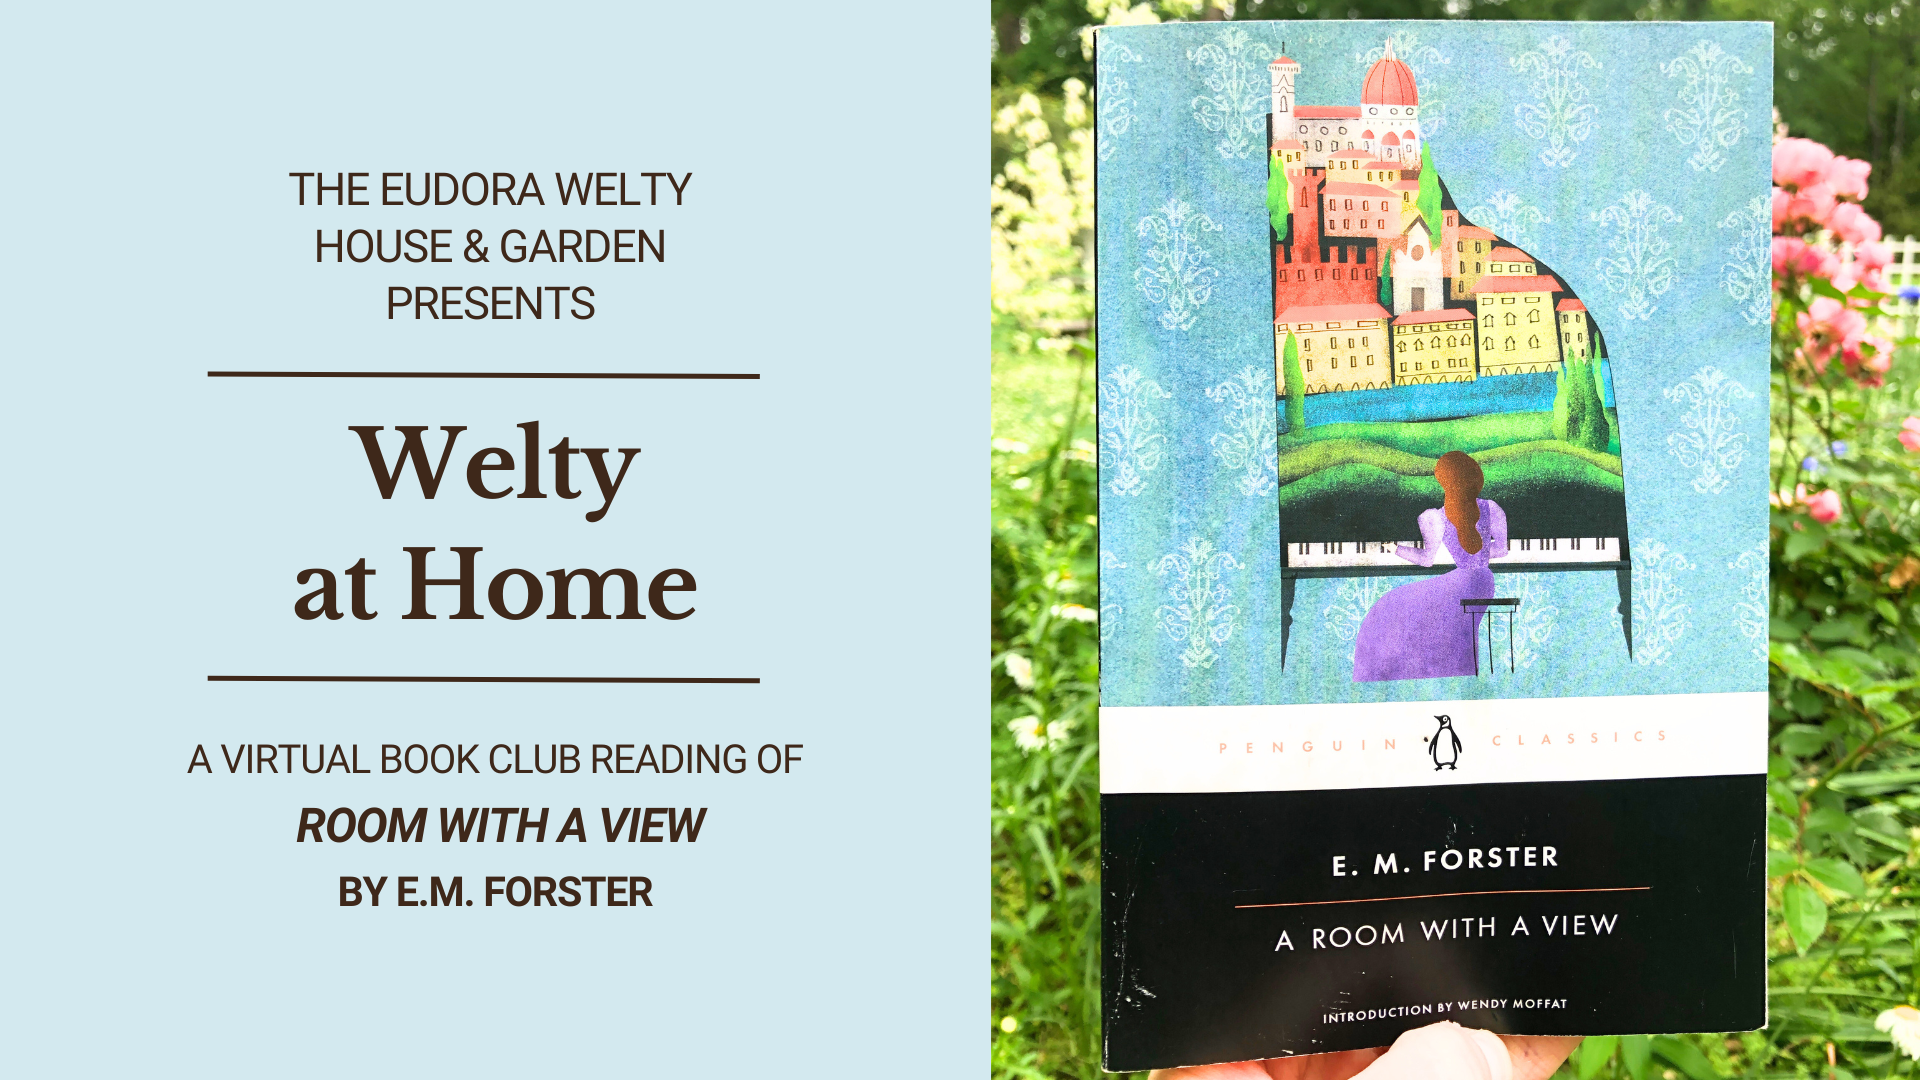 Graphic with blue background and brown text (text reads, "The Eudora Welty House & Garden Presents Welty at Home, a virtual book club reading of E.M. Forester's A ROOM WITH A VIEW) on the left side of the image and a photograph of E.M. Forester's A ROOM WITH A VIEW in the Welty Garden on the right side of the image. 